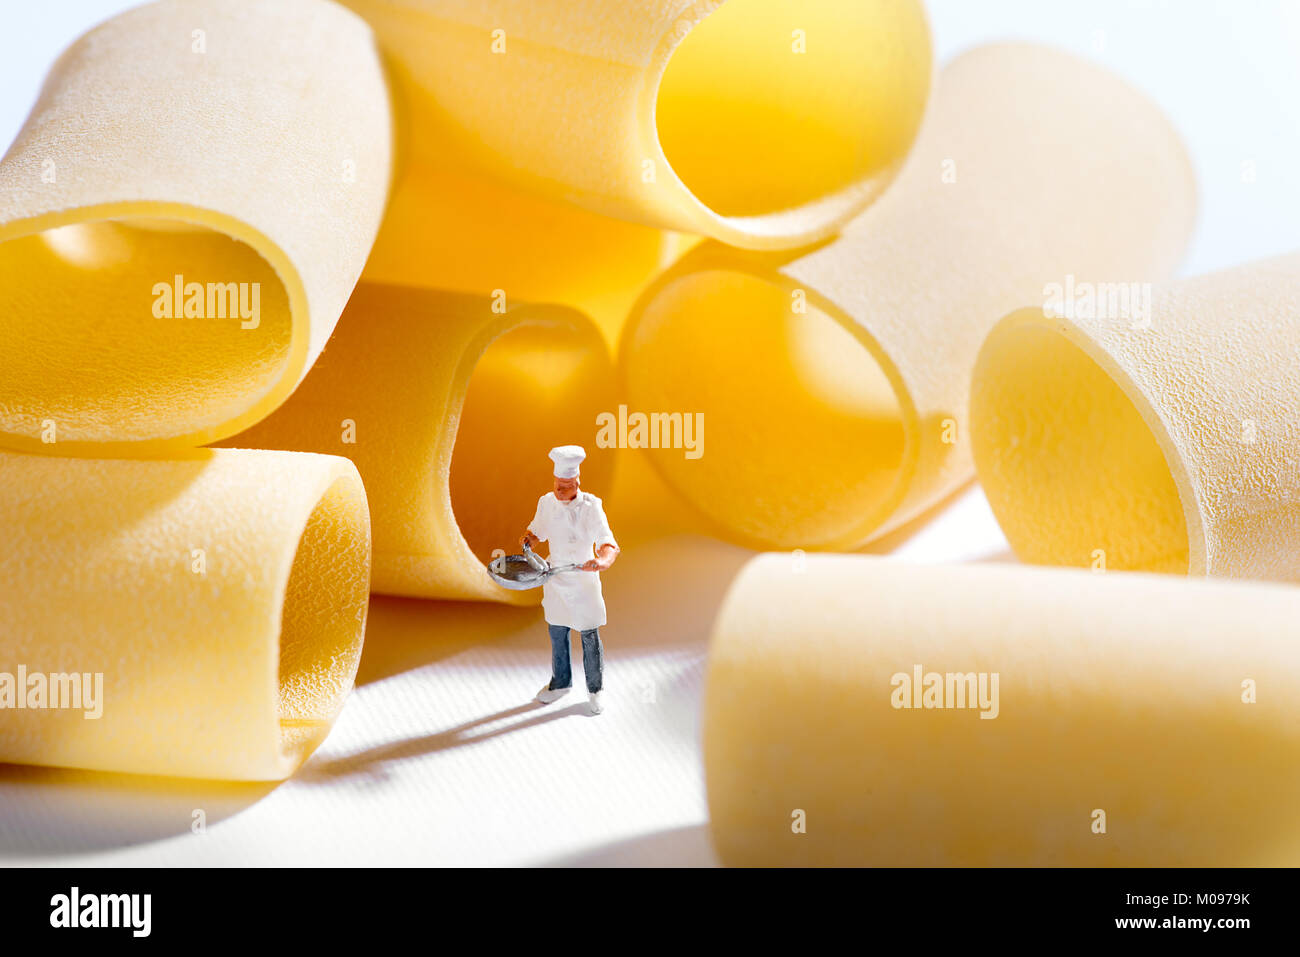 Miniature figure of a chef standing amongst dried Italian pasta tubes in a concept of cooking and food ingredients Stock Photo